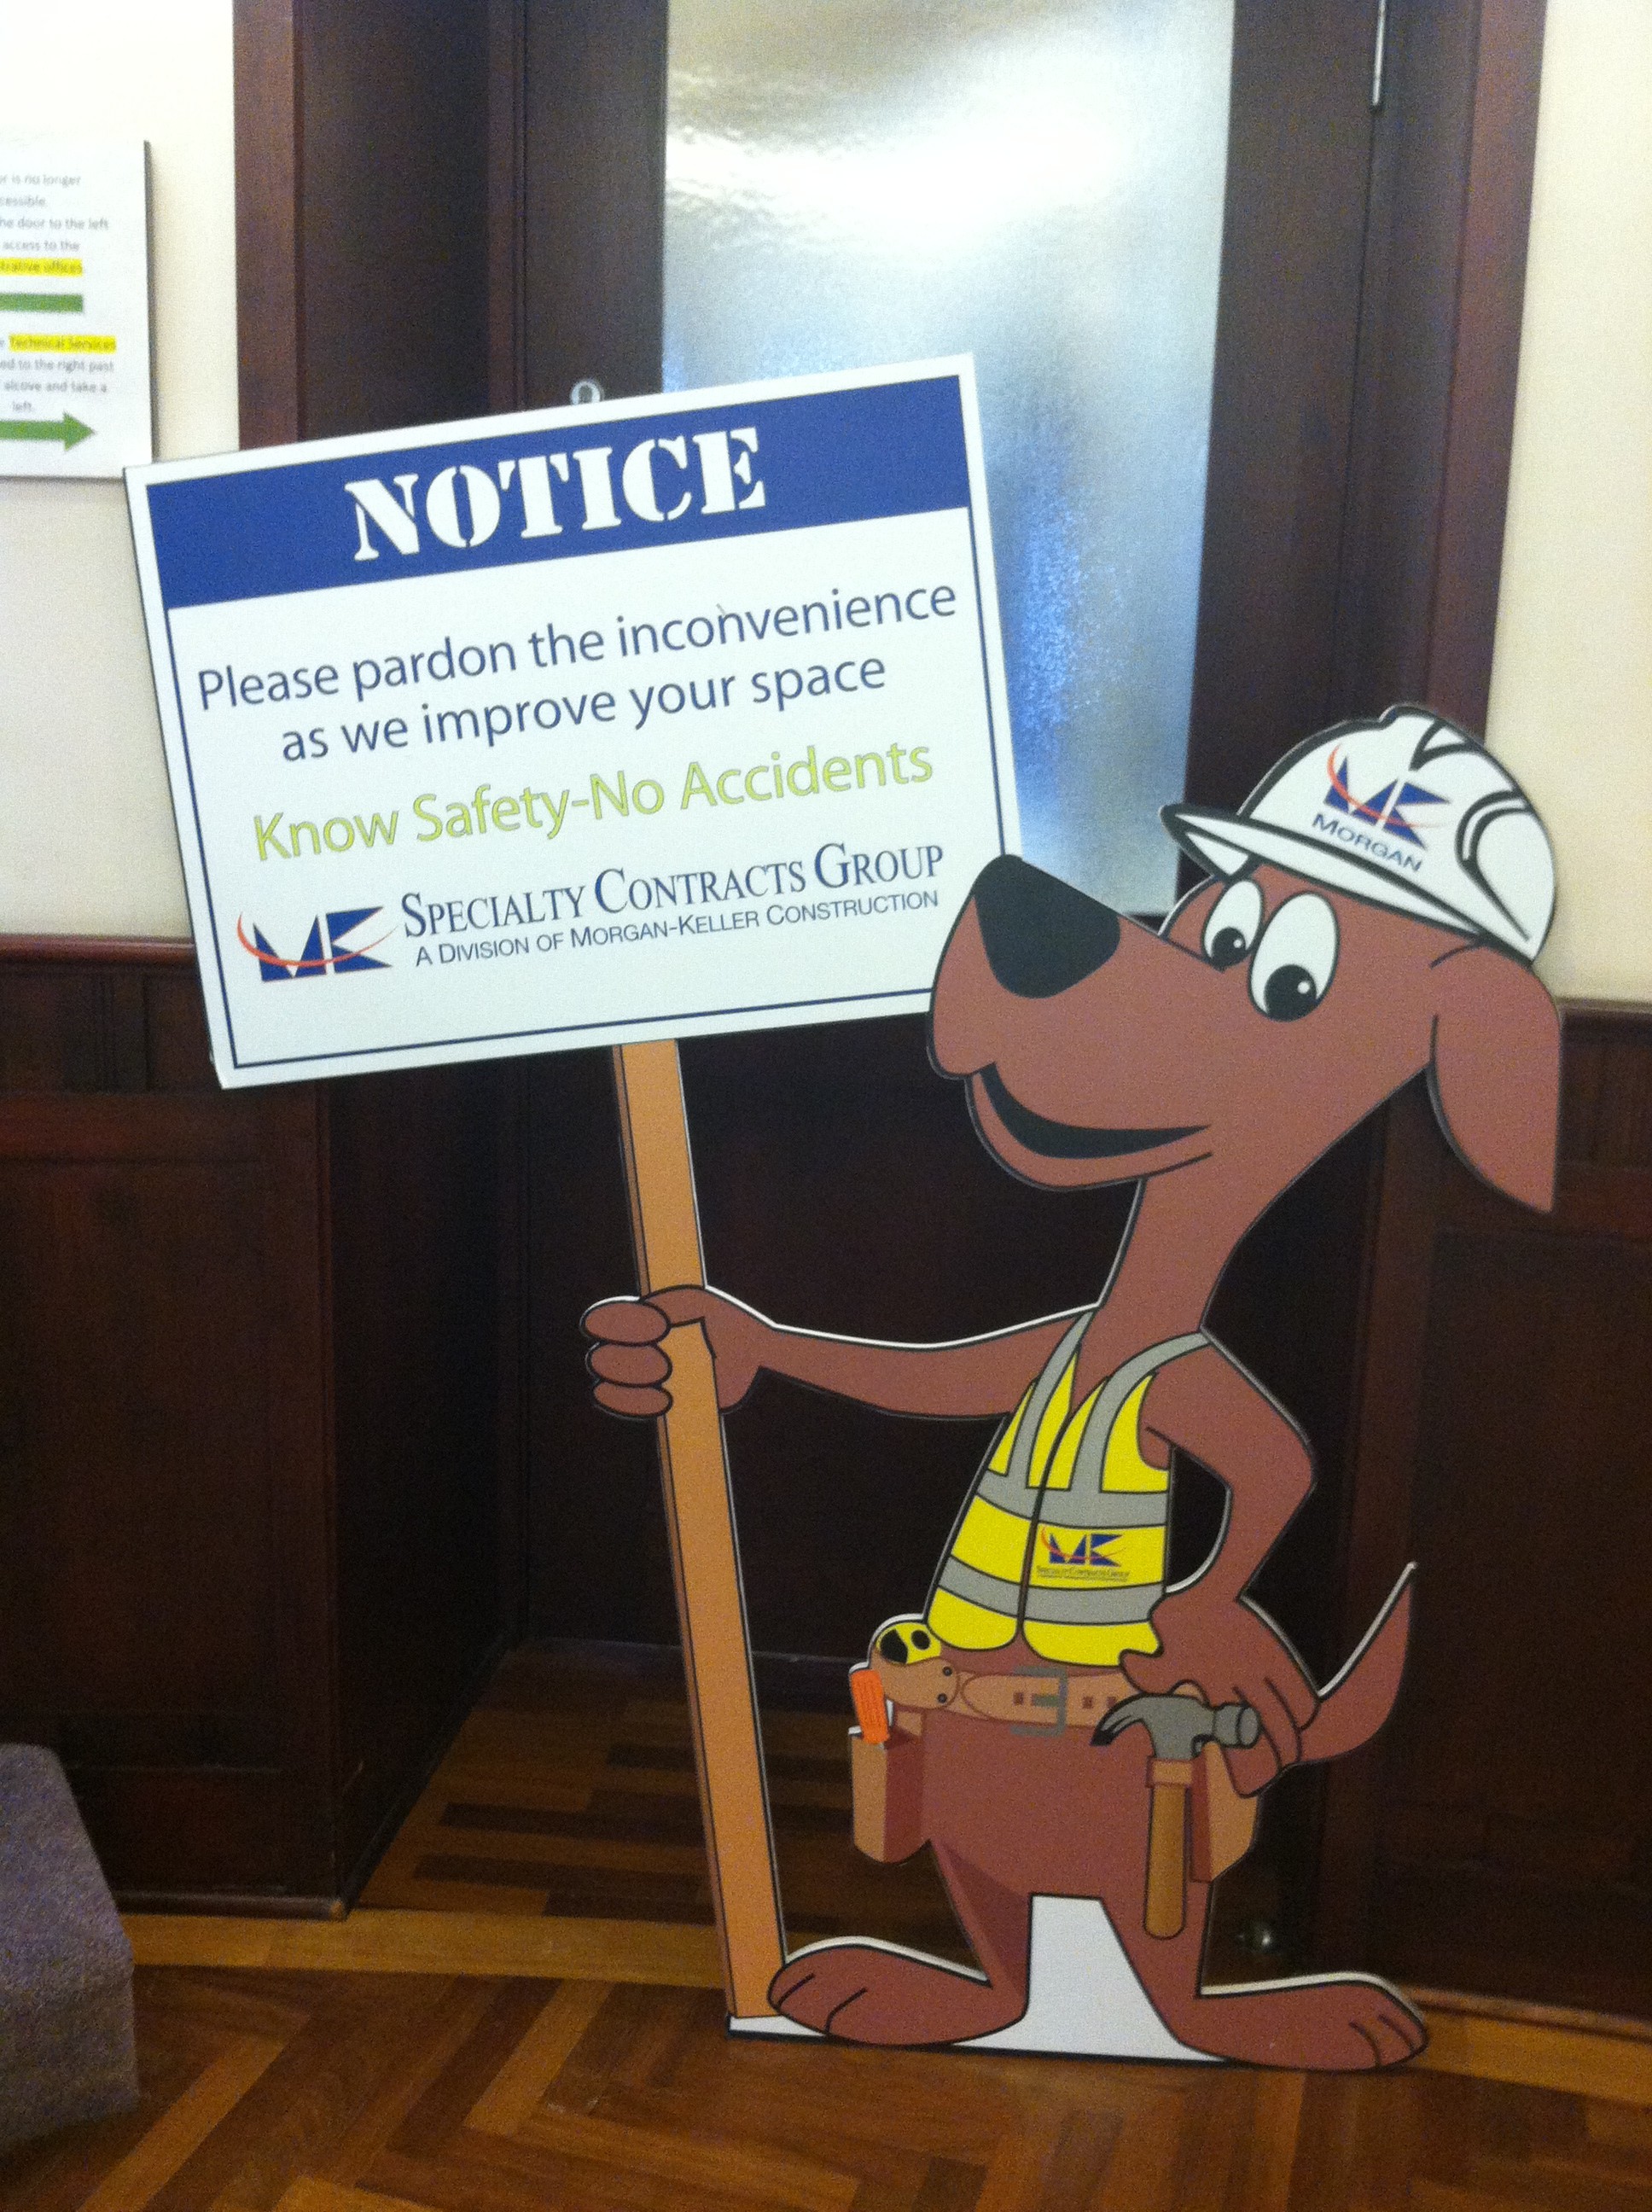 Library renovations are well under way. For more information check out http://www.facebook.com/pages/McDaniel-College-Hoover-Library-Renovation/172116582884576.